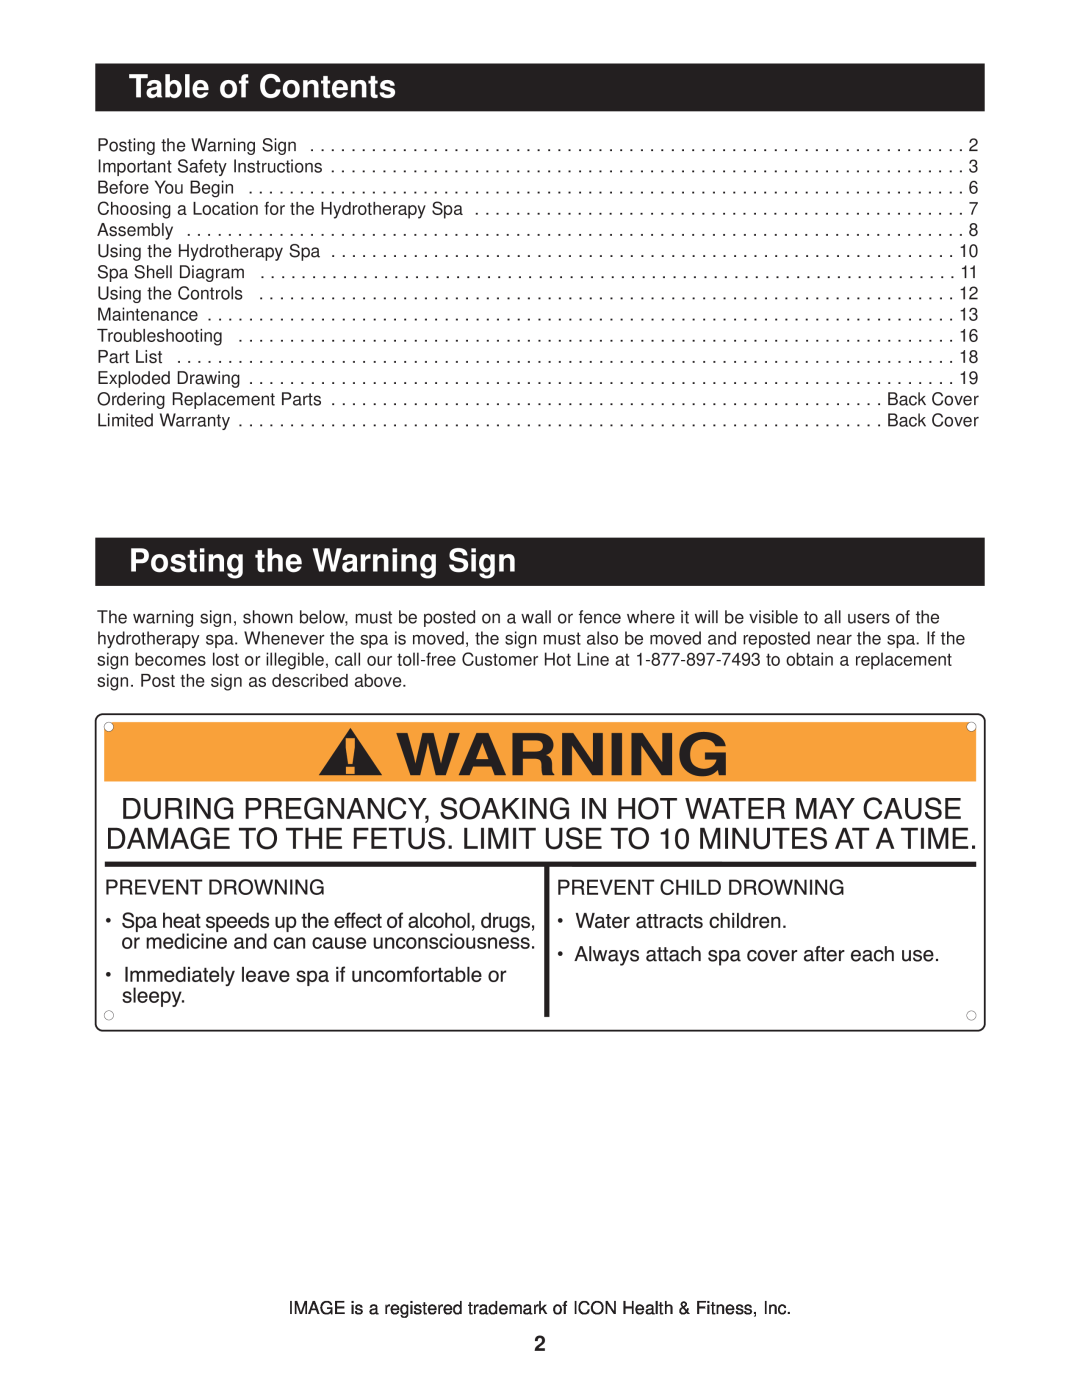 Image IMSG73911 Table of Contents, Posting the Warning Sign, IMAGE is a registered trademark of ICON Health & Fitness, Inc 